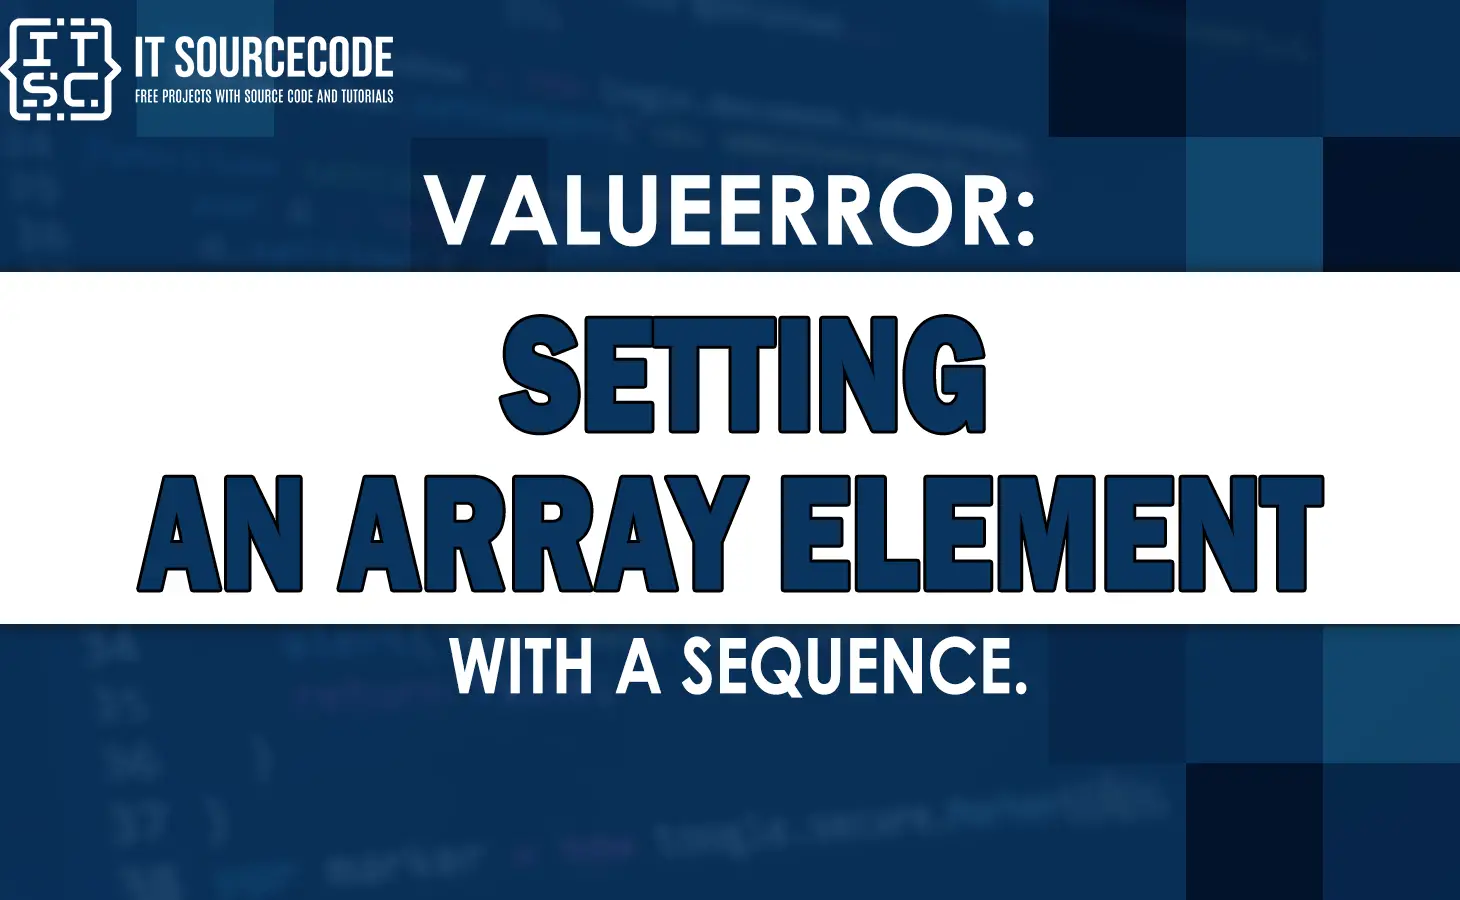 Valueerror setting an array element with a sequence.